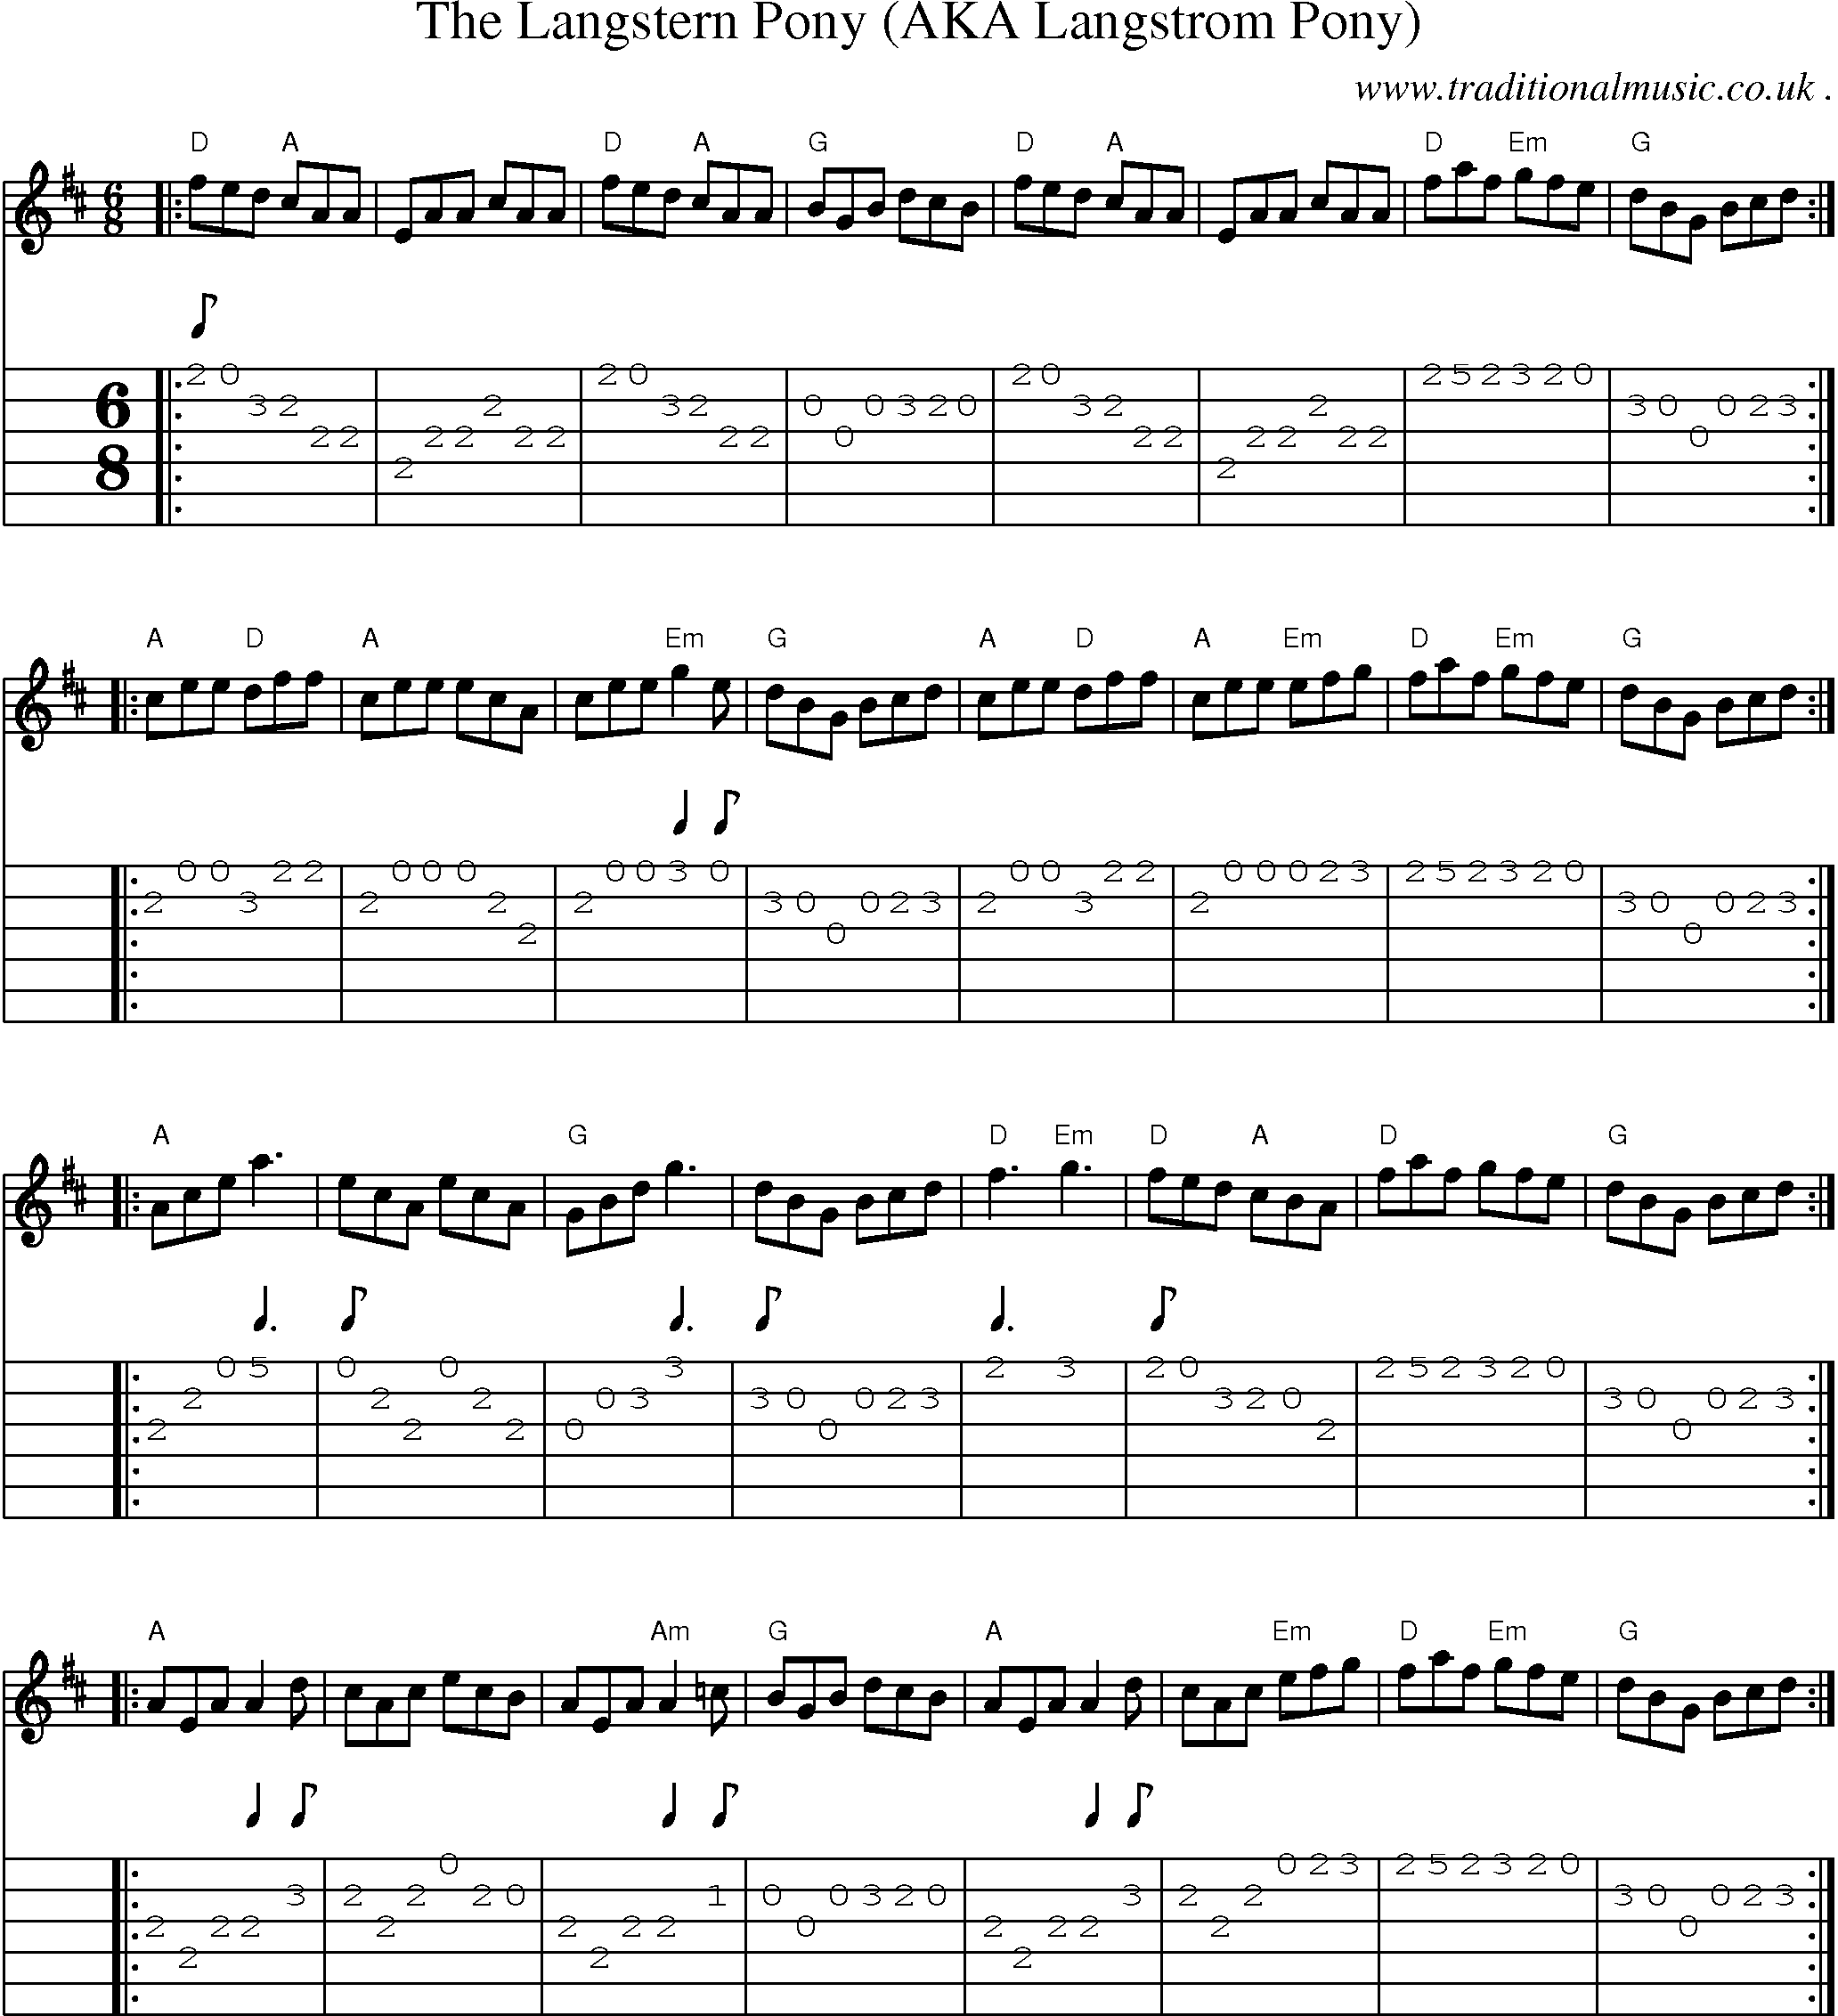 Music Score and Guitar Tabs for The Langstern Pony (aka Langstrom Pony)